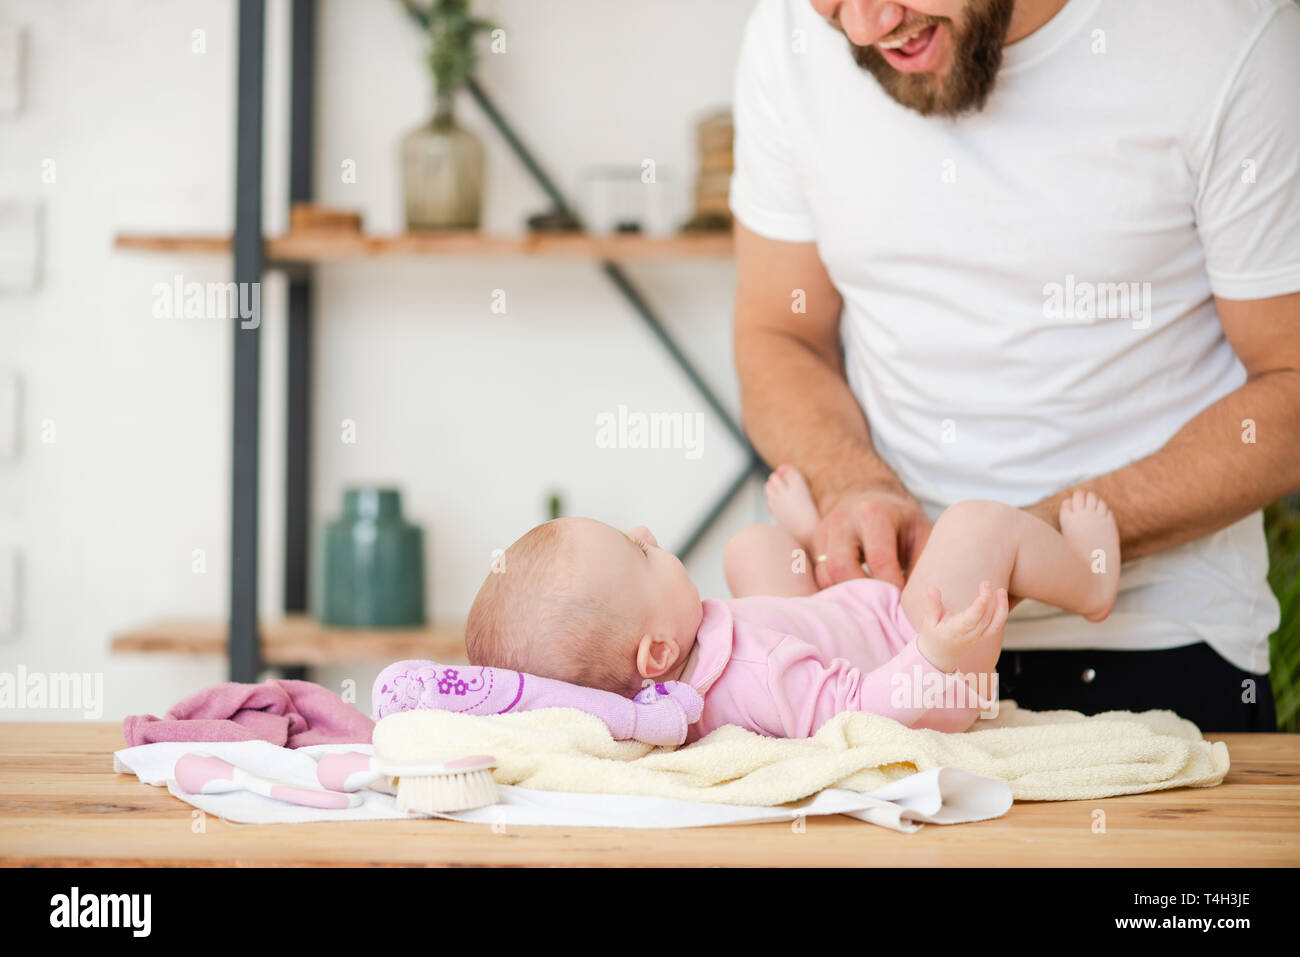 Child is lying on table, dad smiles. Stock Photo